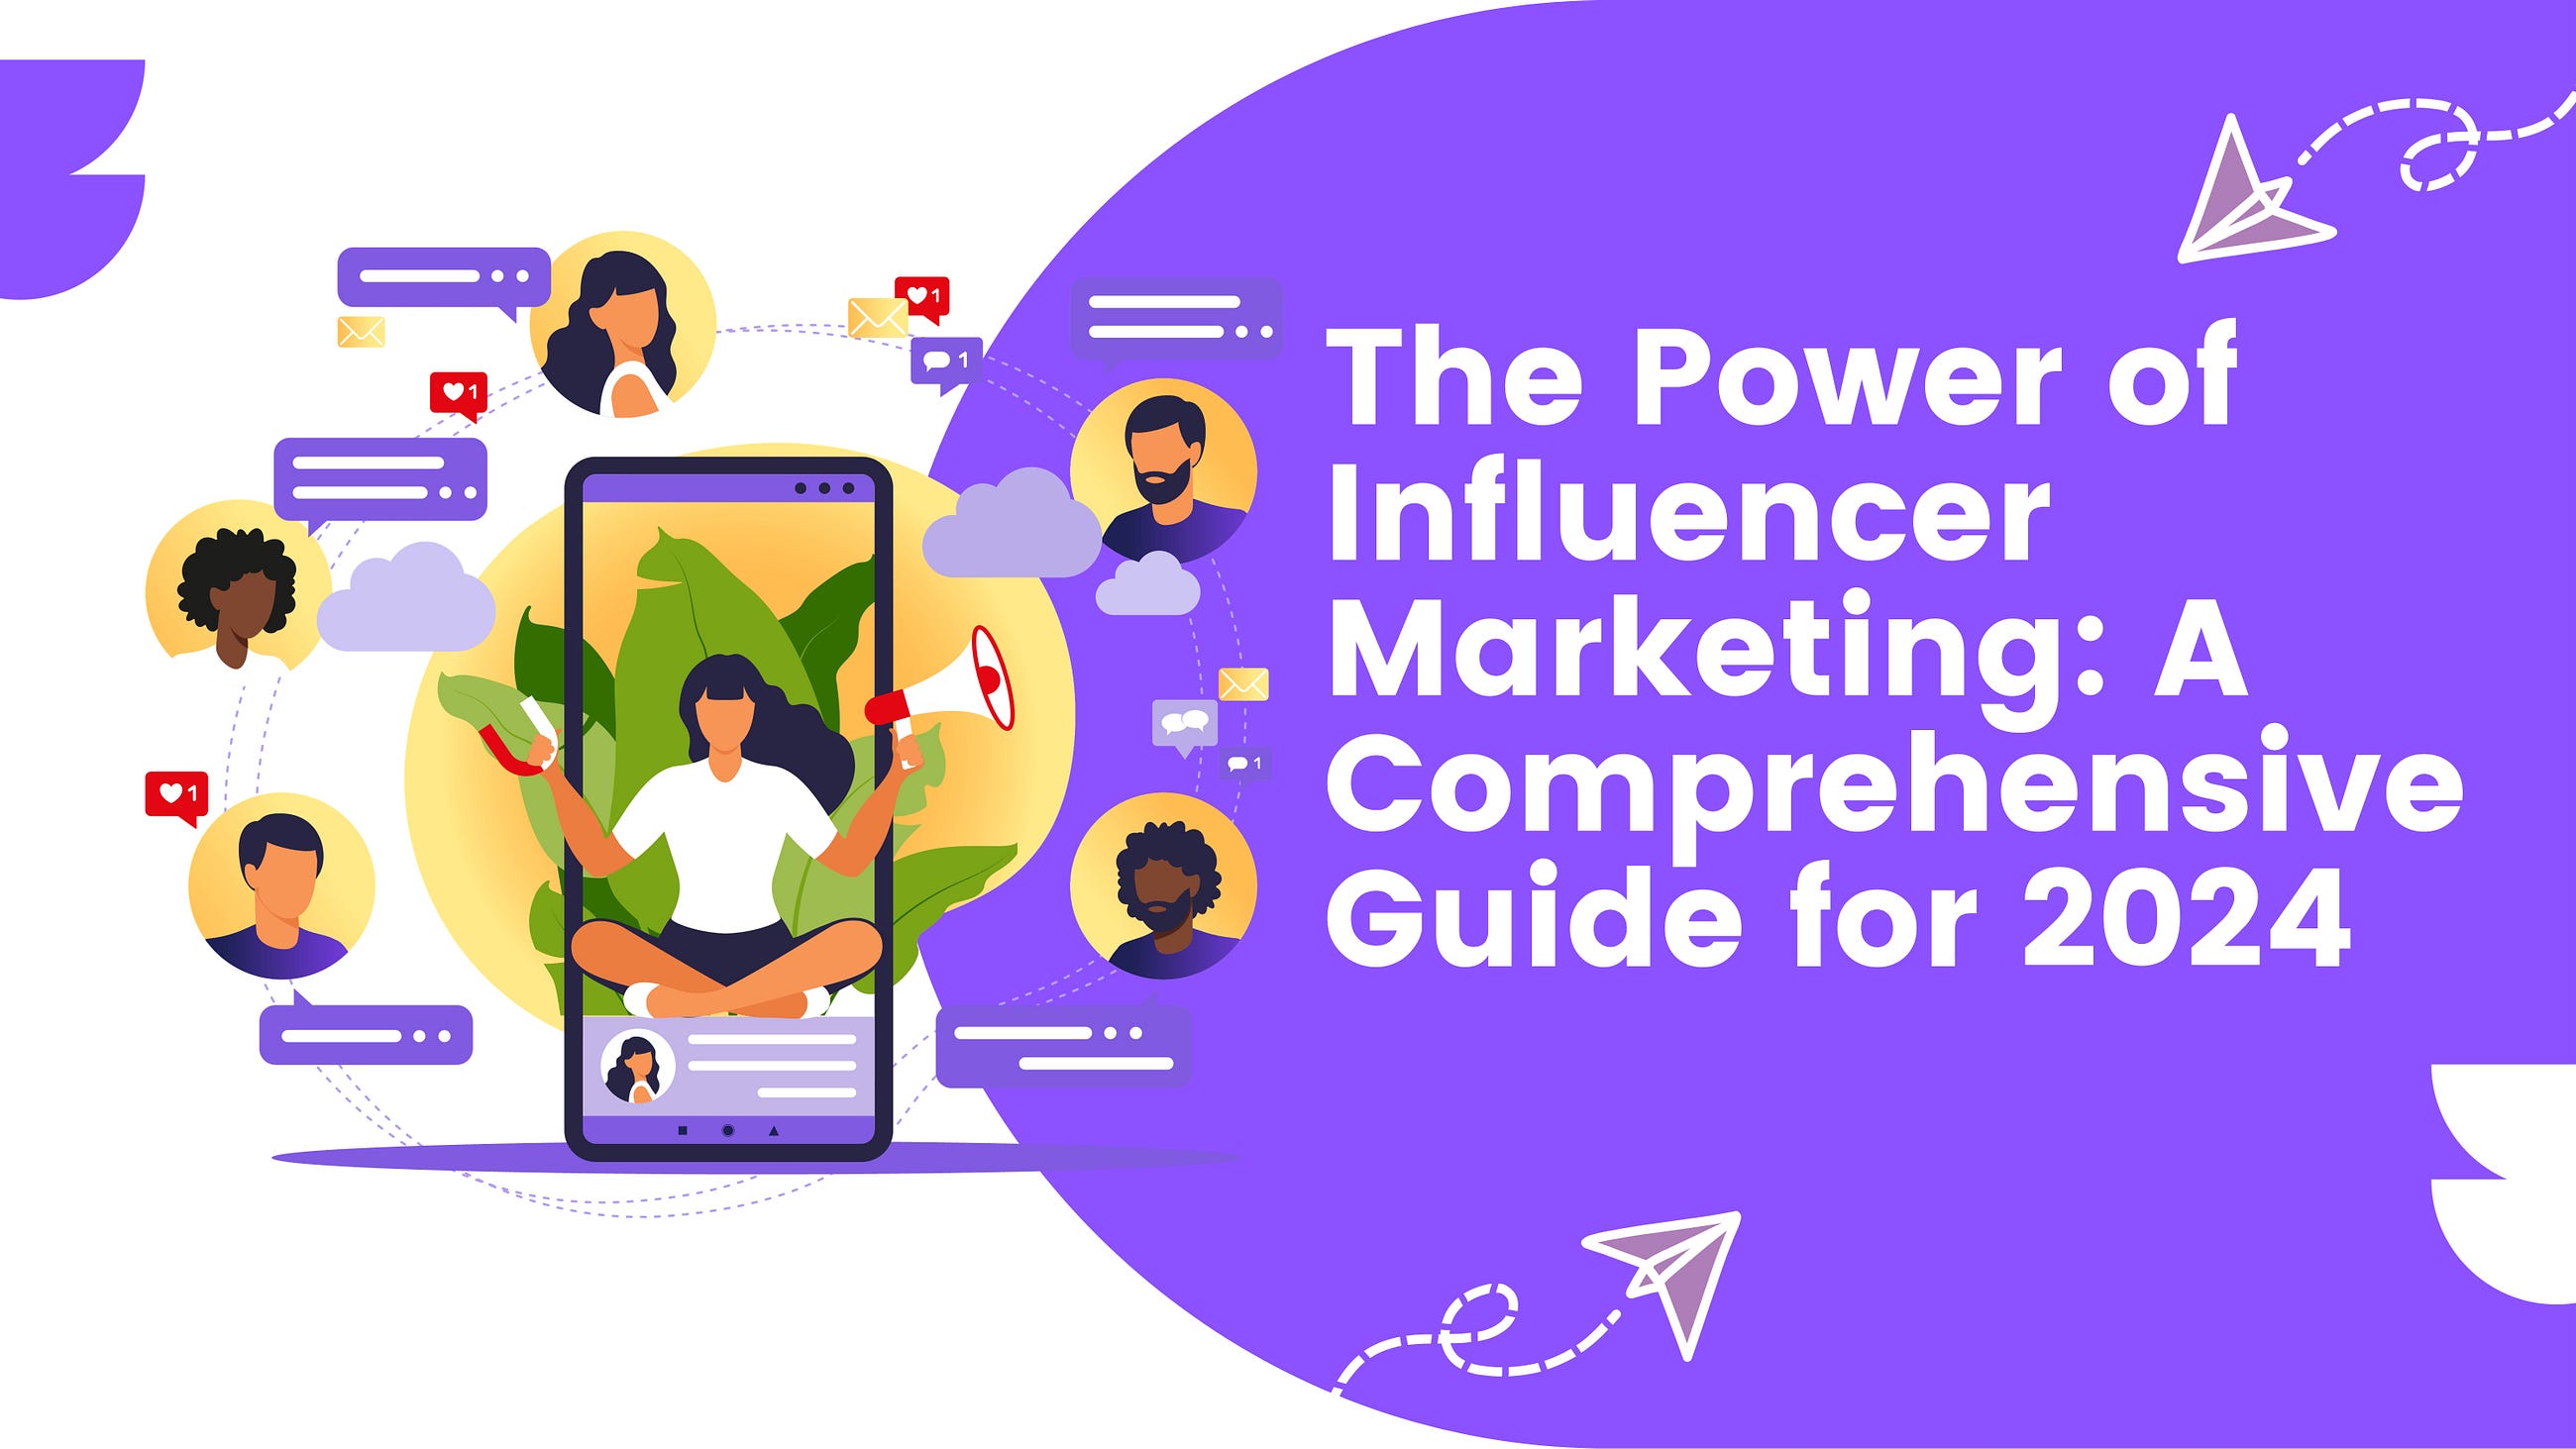 The Power of Influencer Marketing: A Comprehensive Guide for 2024